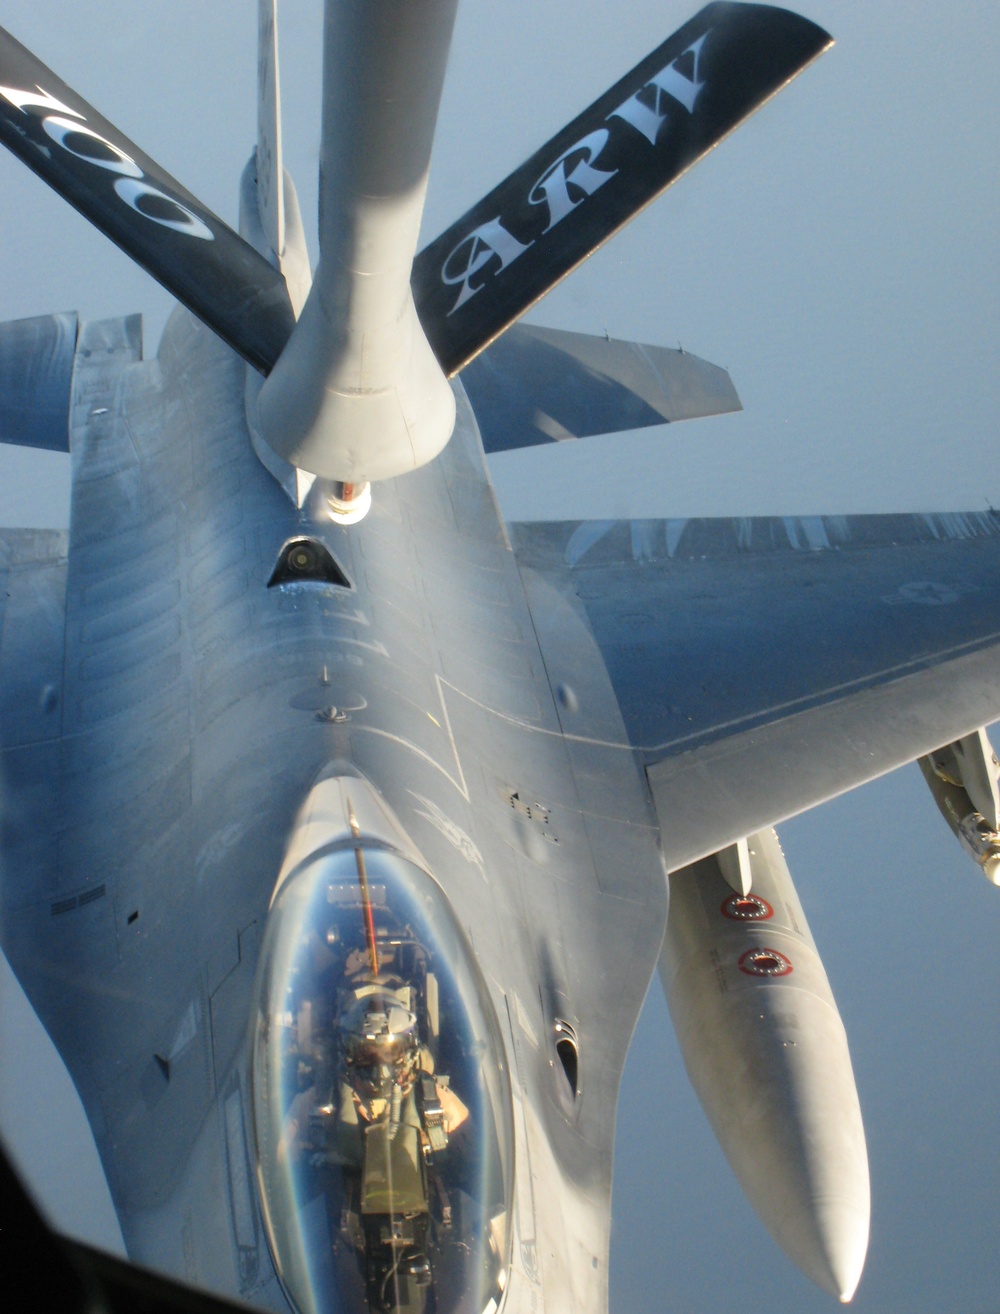 Tanker team refuels F-16s on final mission for OUP